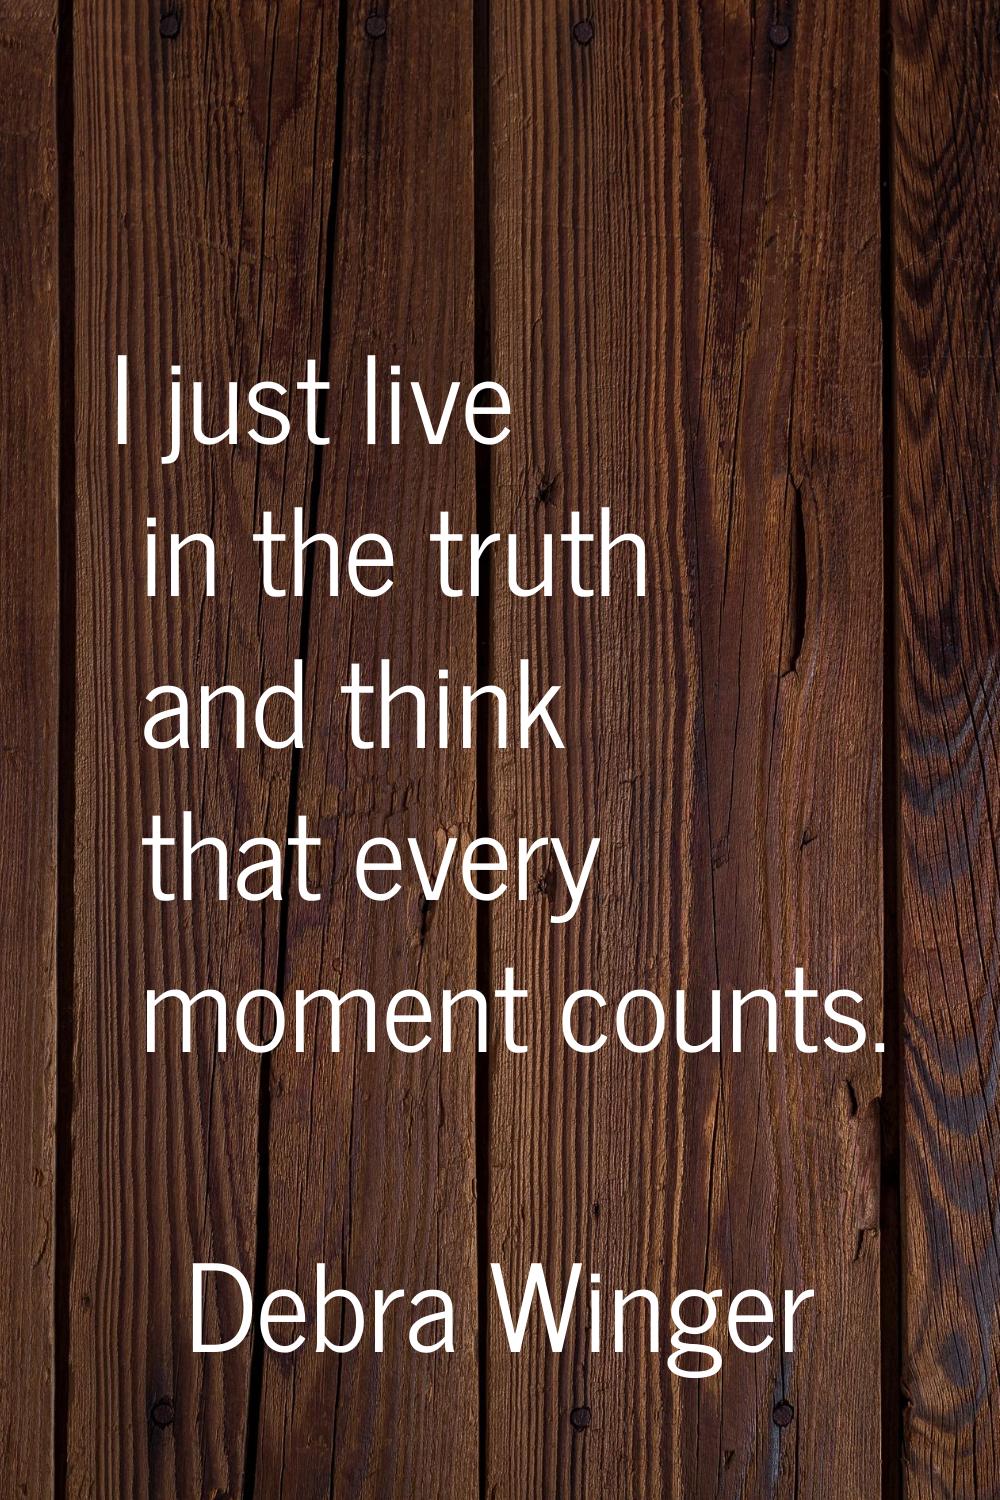 I just live in the truth and think that every moment counts.